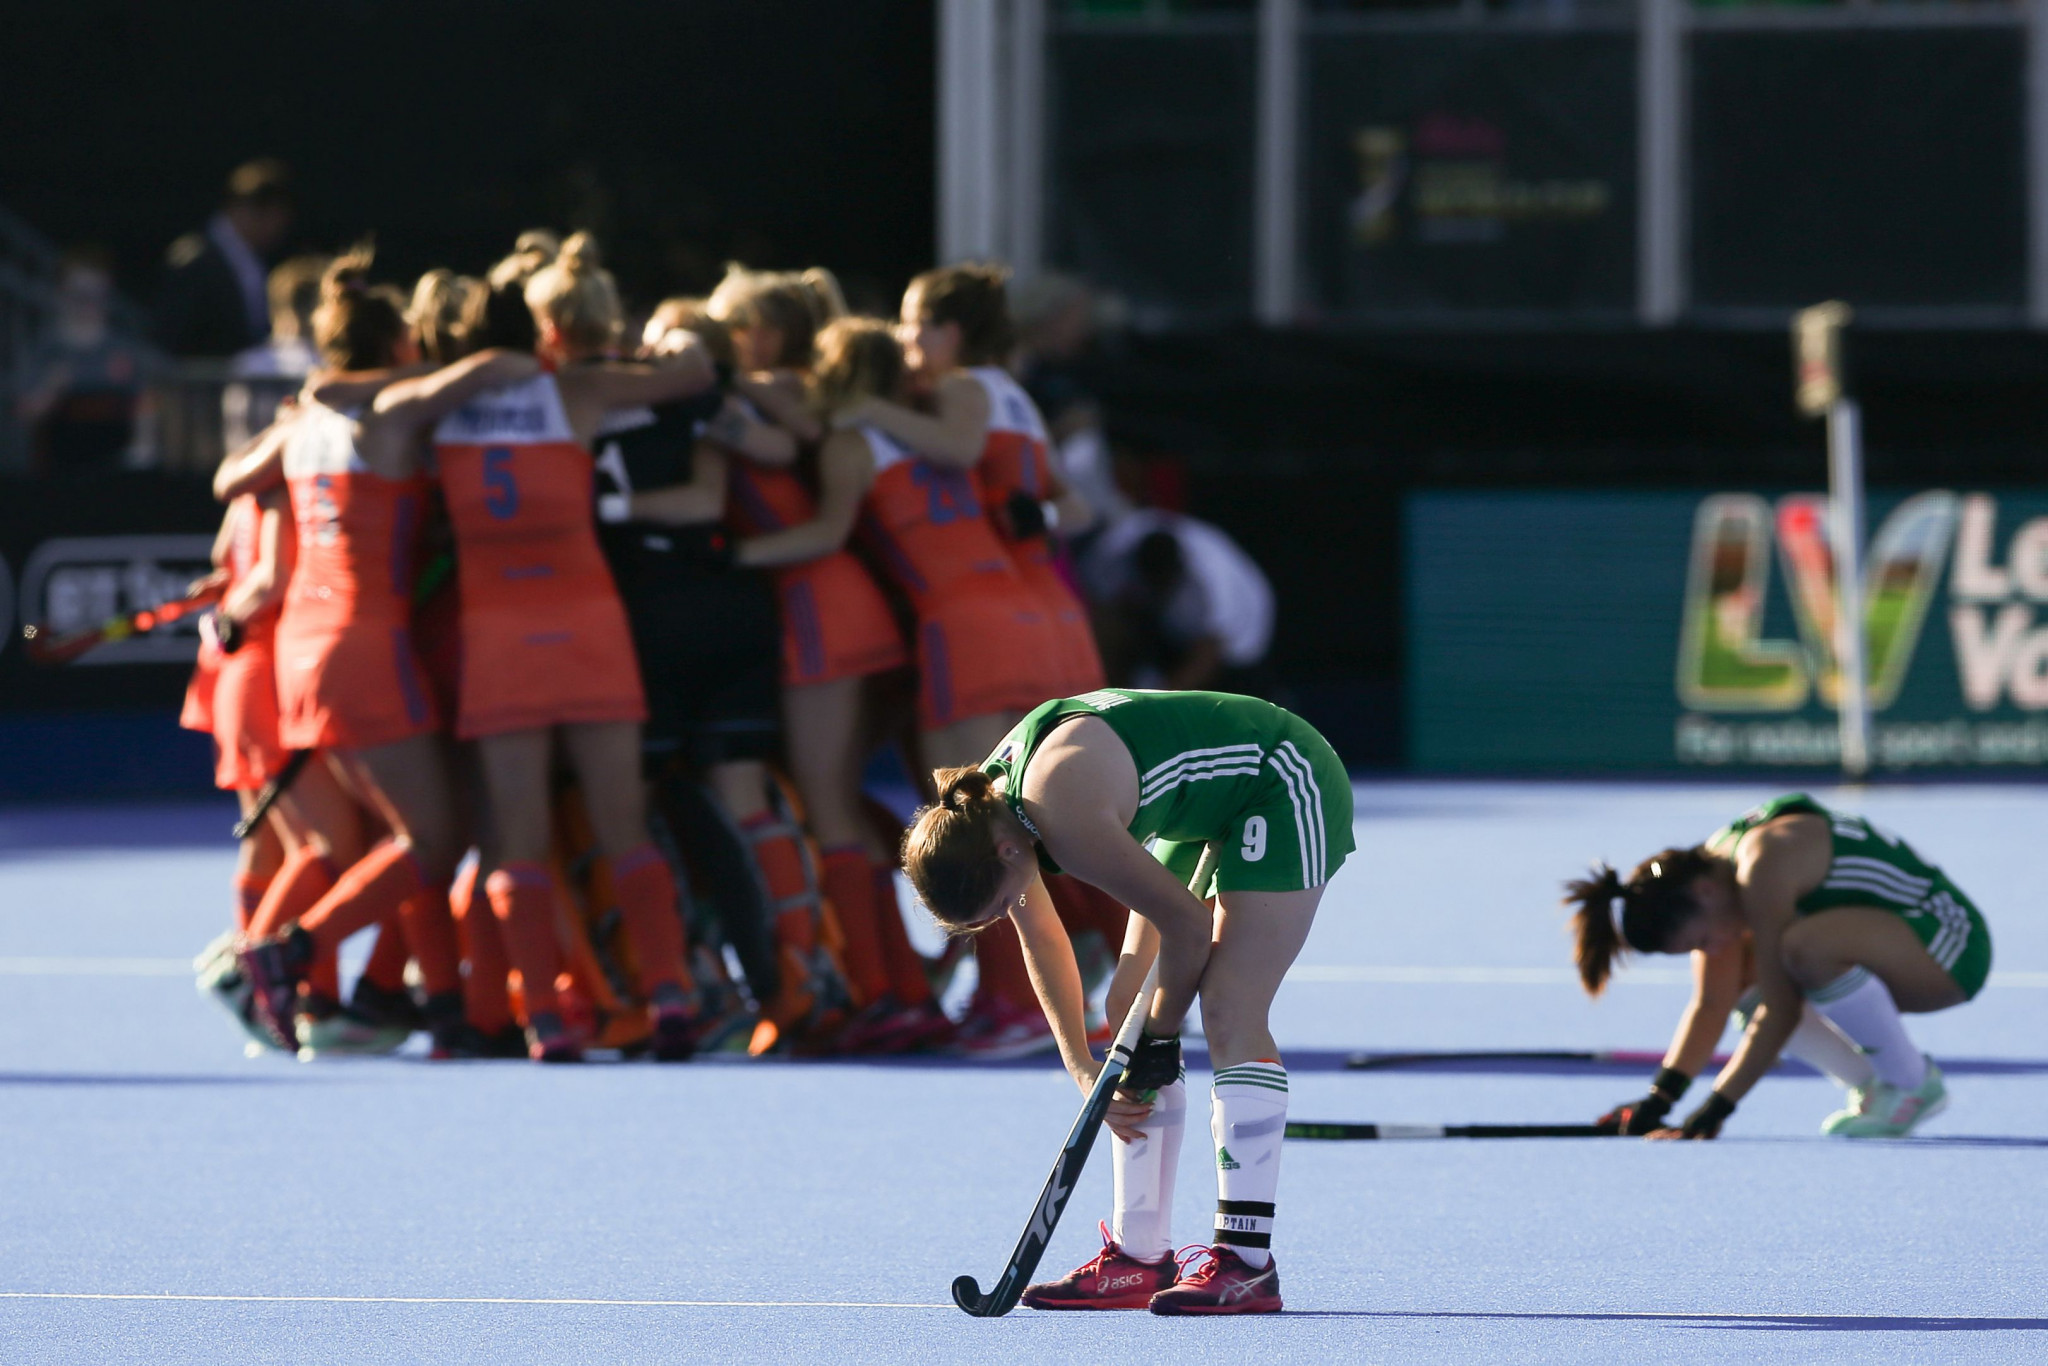 Ireland's miracle run at Women's Hockey World Cup ends as Dutch defend title with 6-0 win